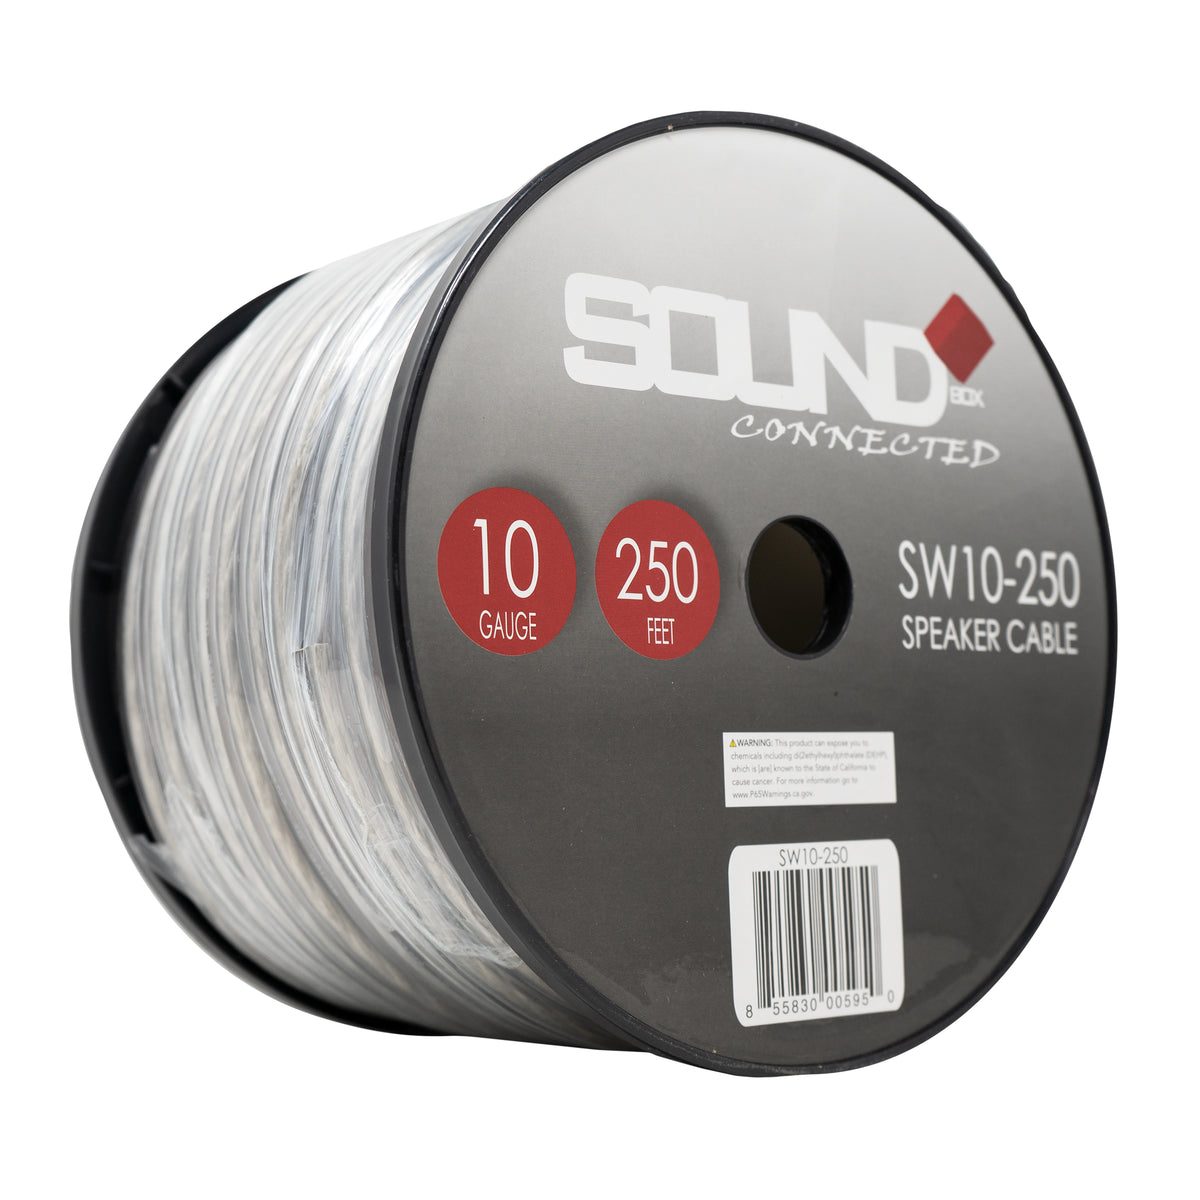 Connected 250 Foot Spool, 10 Gauge Frosted Speaker Wire